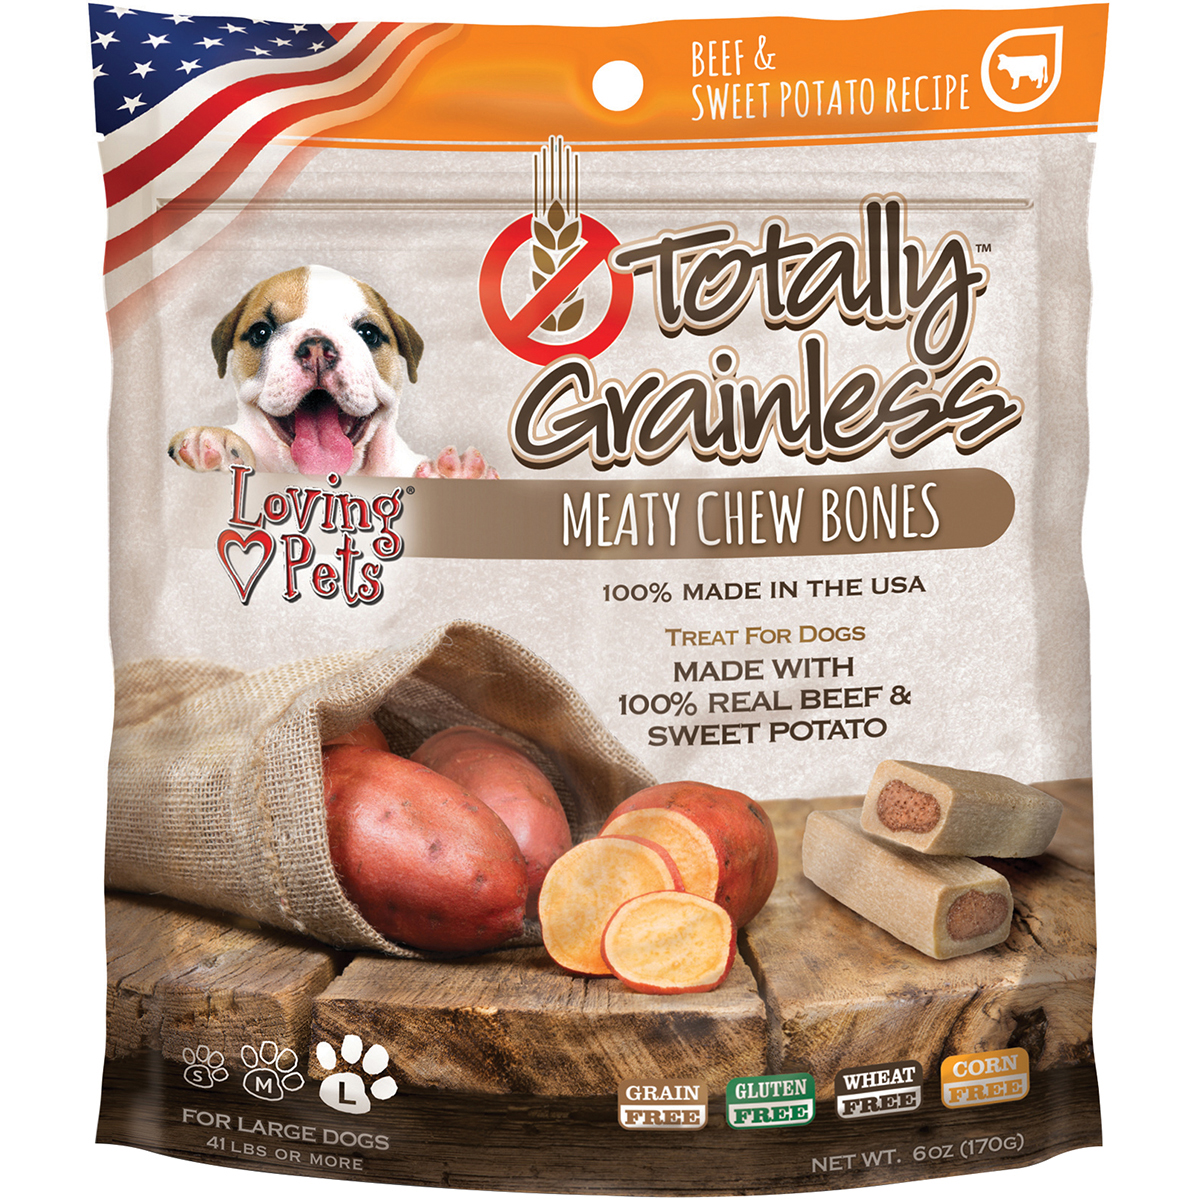 Lp5302 Totally Grainless Meaty Chewy Bones For Large Dogs Beef & Sweet Potato - 6 Oz.